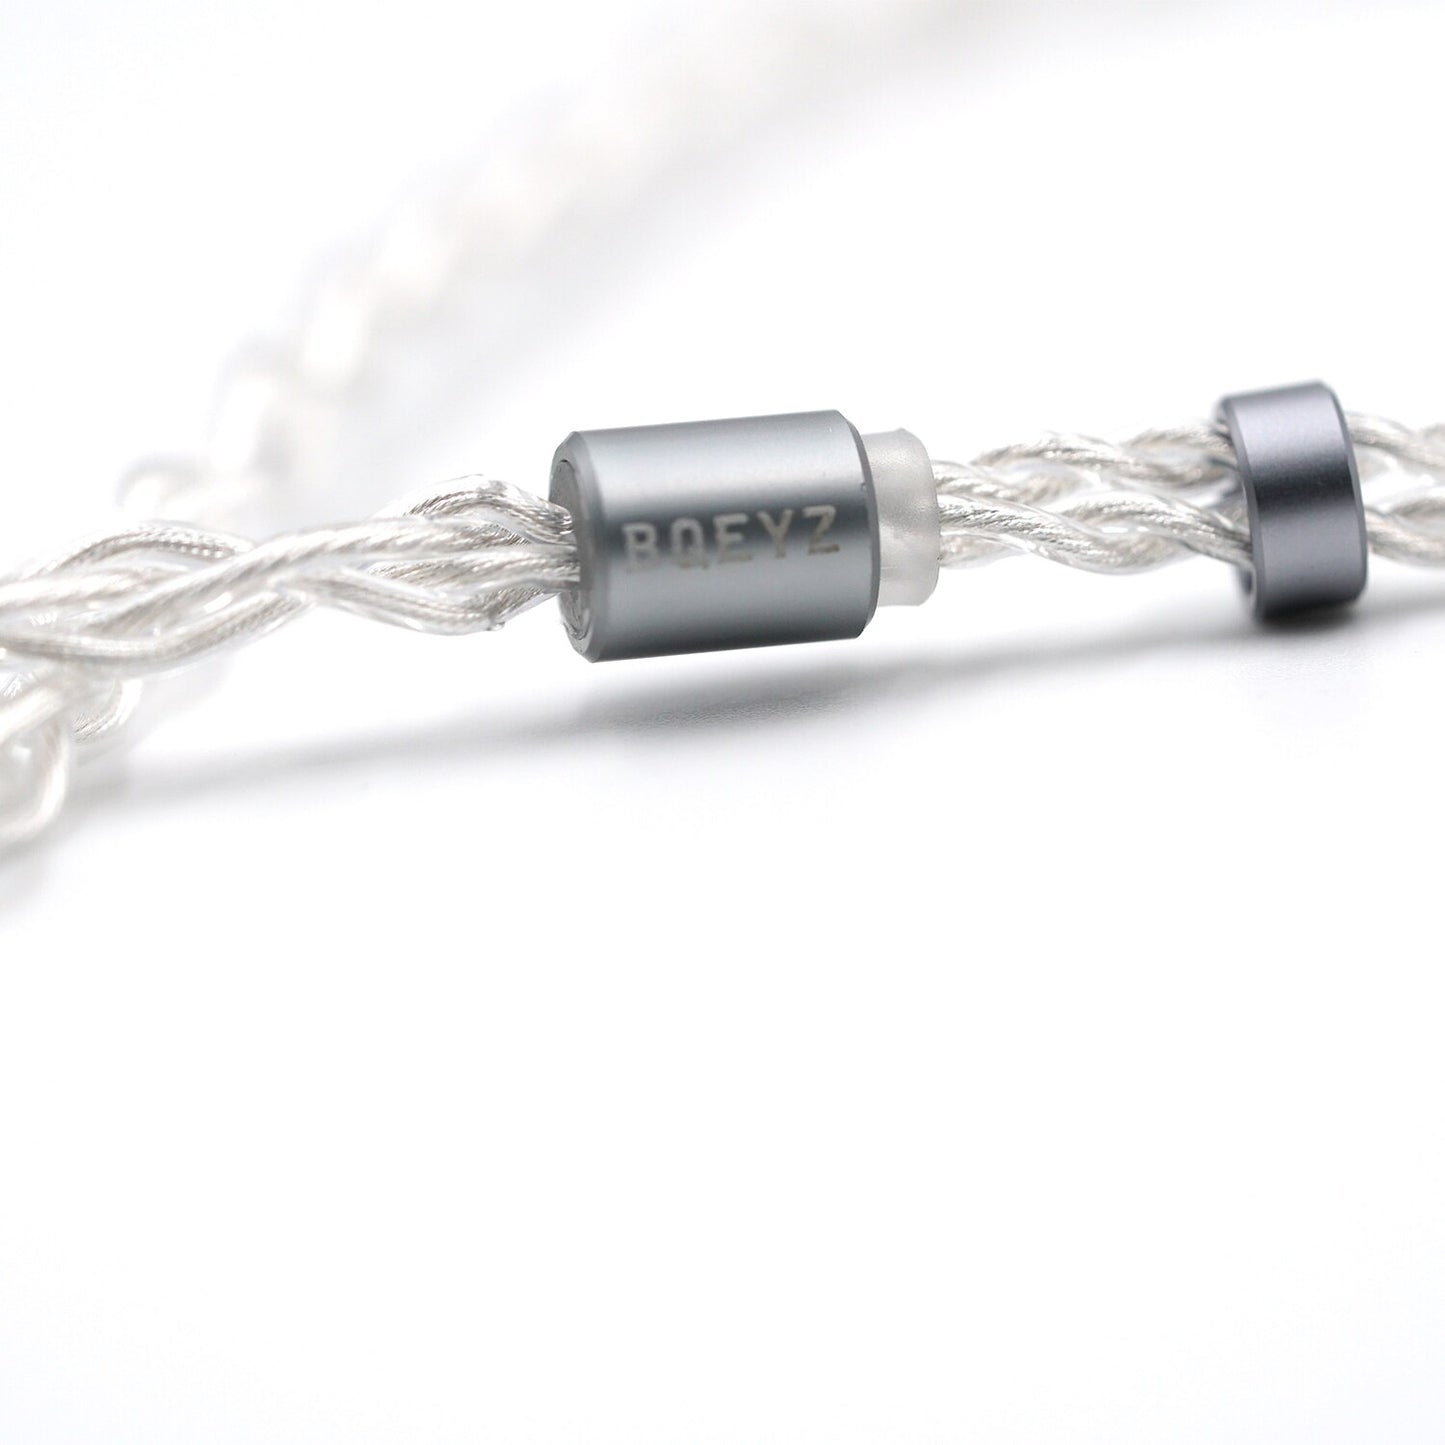 BQEYZ C13 4 cores single crystal copper-plated silver Earphone Cable